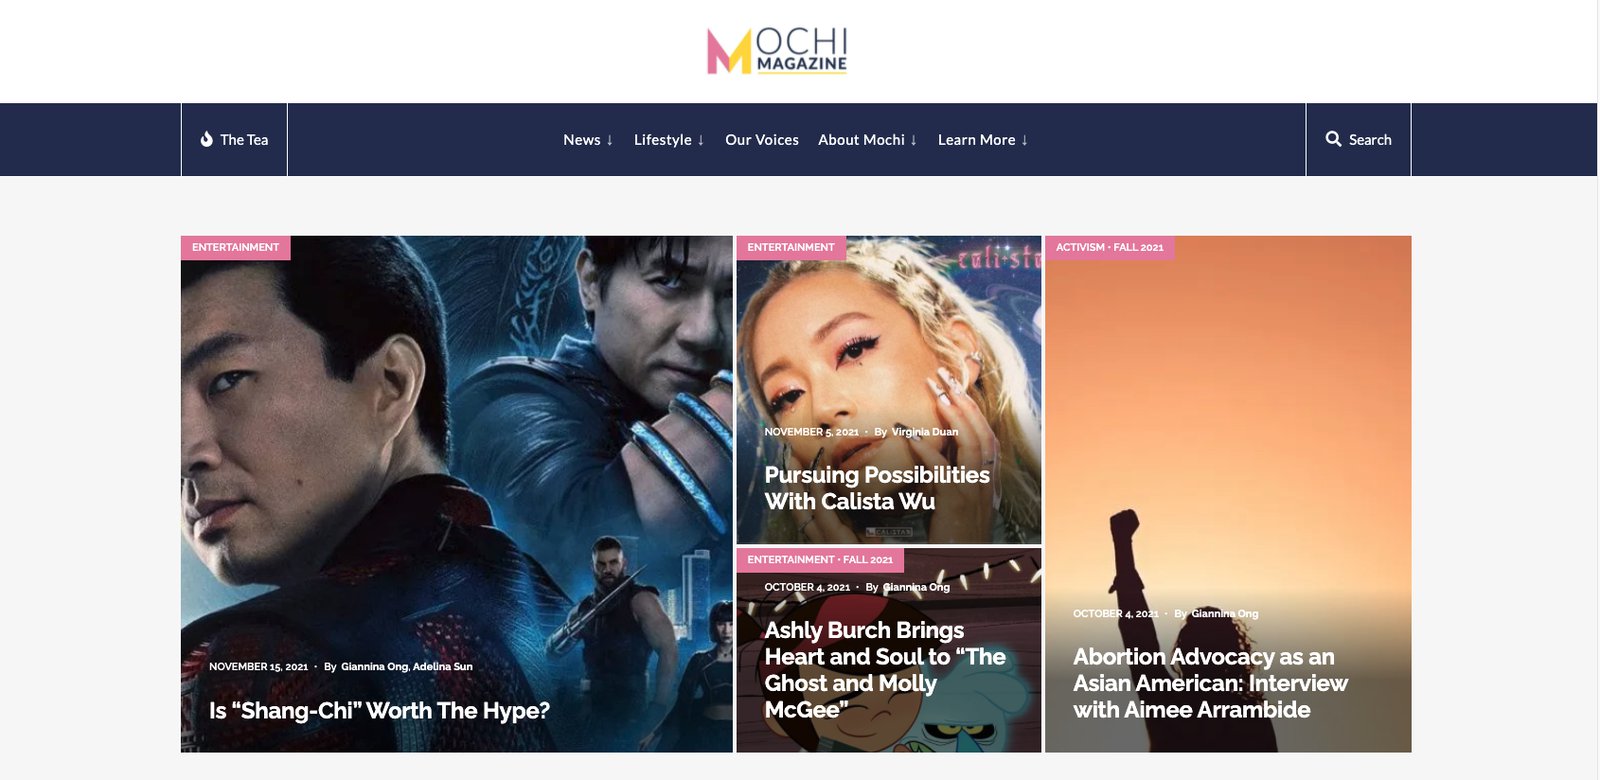 A screenshot of the Mochi Magazine homepage shows a selection of four articles under the website's navigation bar.